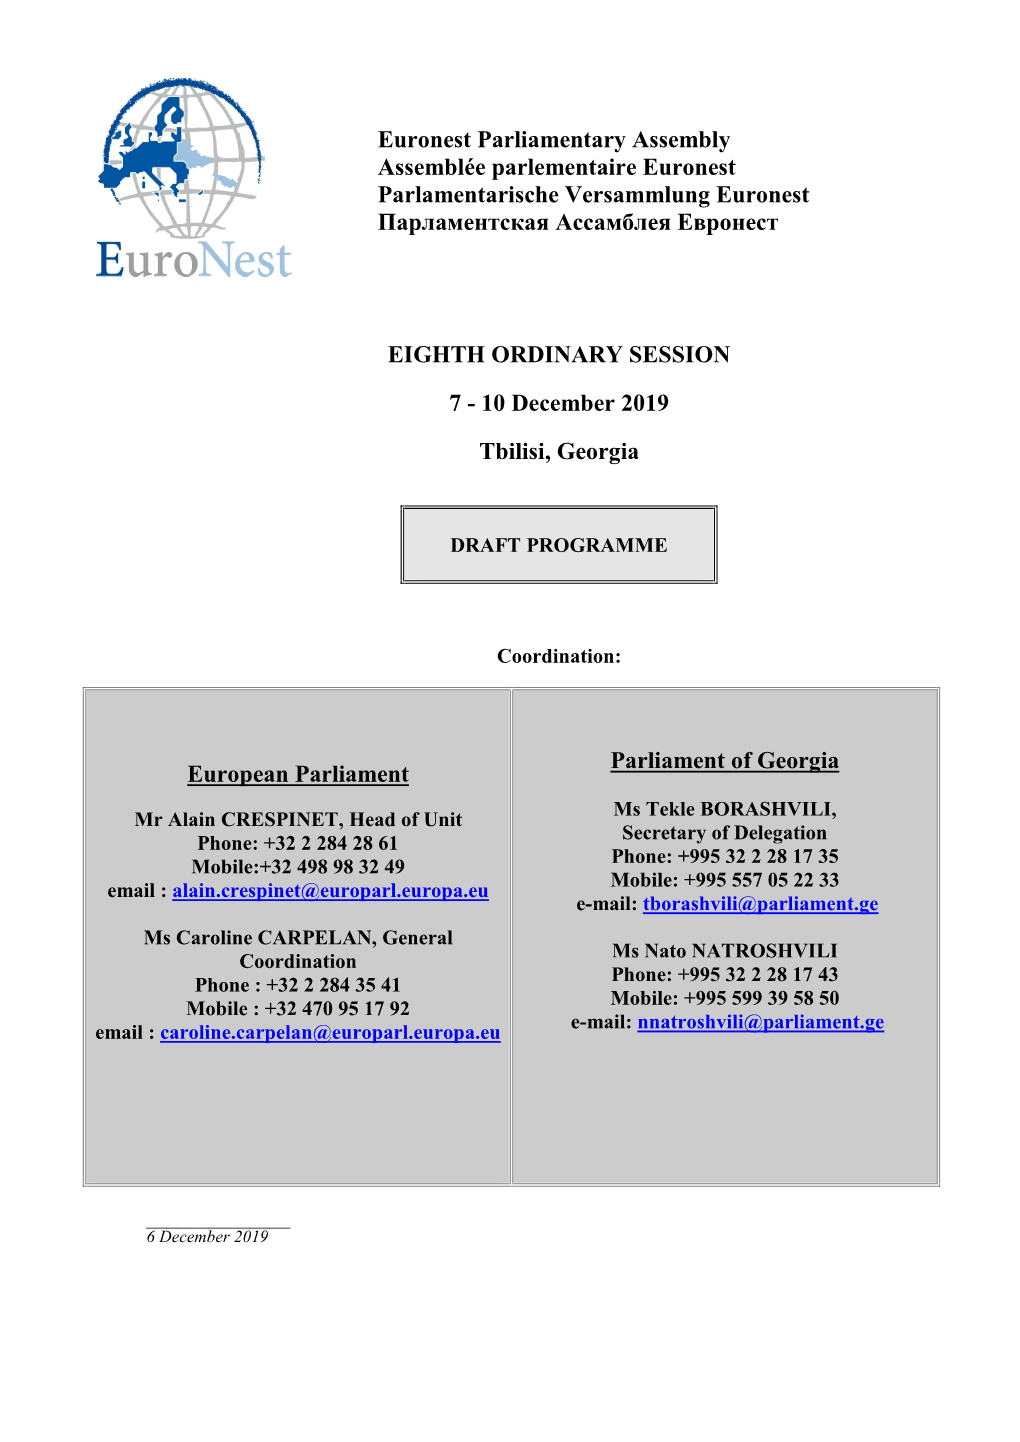 Programme of the 8Th Euronest PA Session